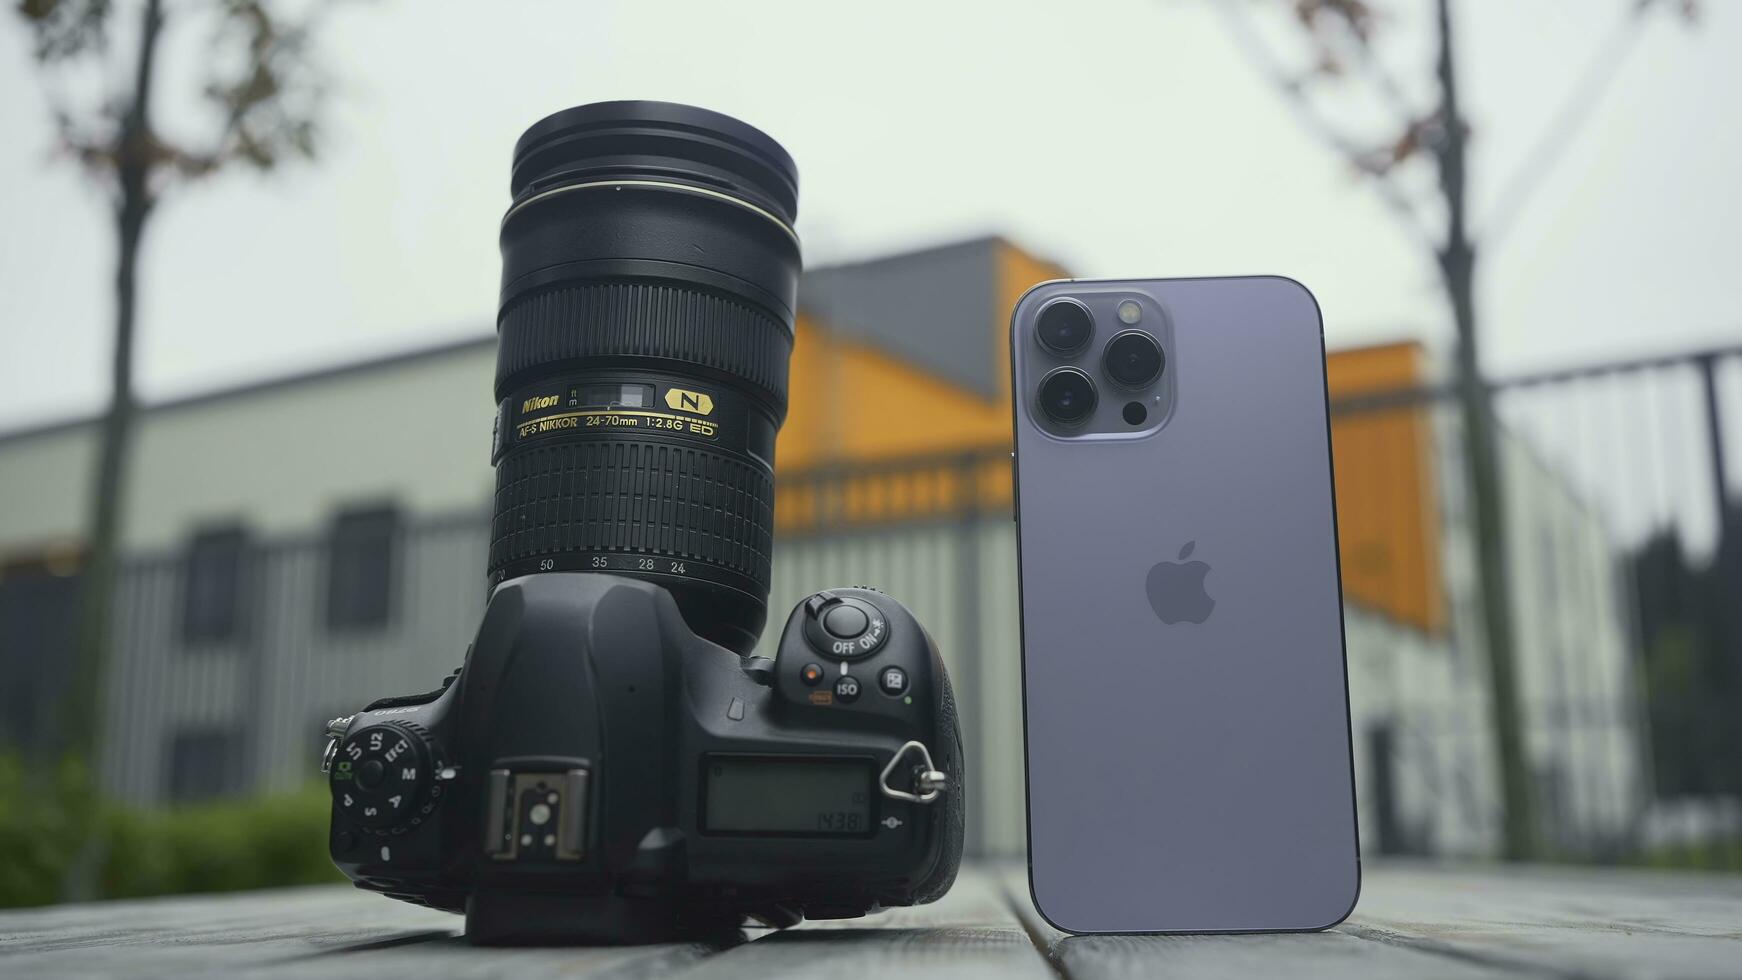 RUSSIA, MOSCOW - SEPTEMBER 27, 2021. Camera and phone comparison. Action. Professional camera with lens or new iPhone. Comparison of cameras of new iPhone 13 pro with professional camera photo